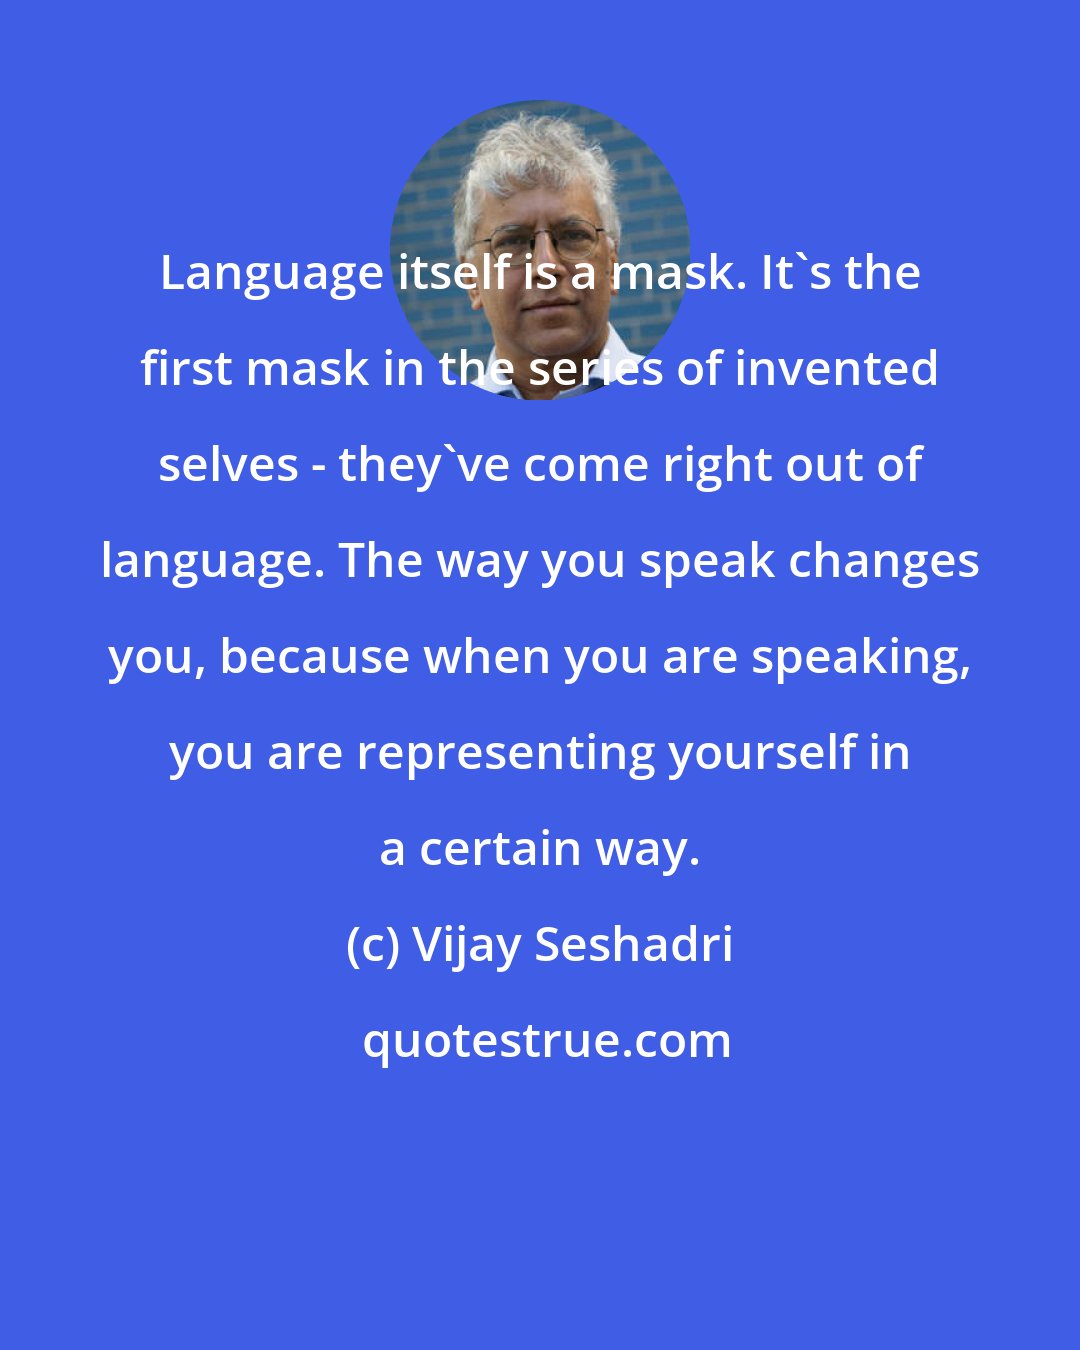 Vijay Seshadri: Language itself is a mask. It's the first mask in the series of invented selves - they've come right out of language. The way you speak changes you, because when you are speaking, you are representing yourself in a certain way.